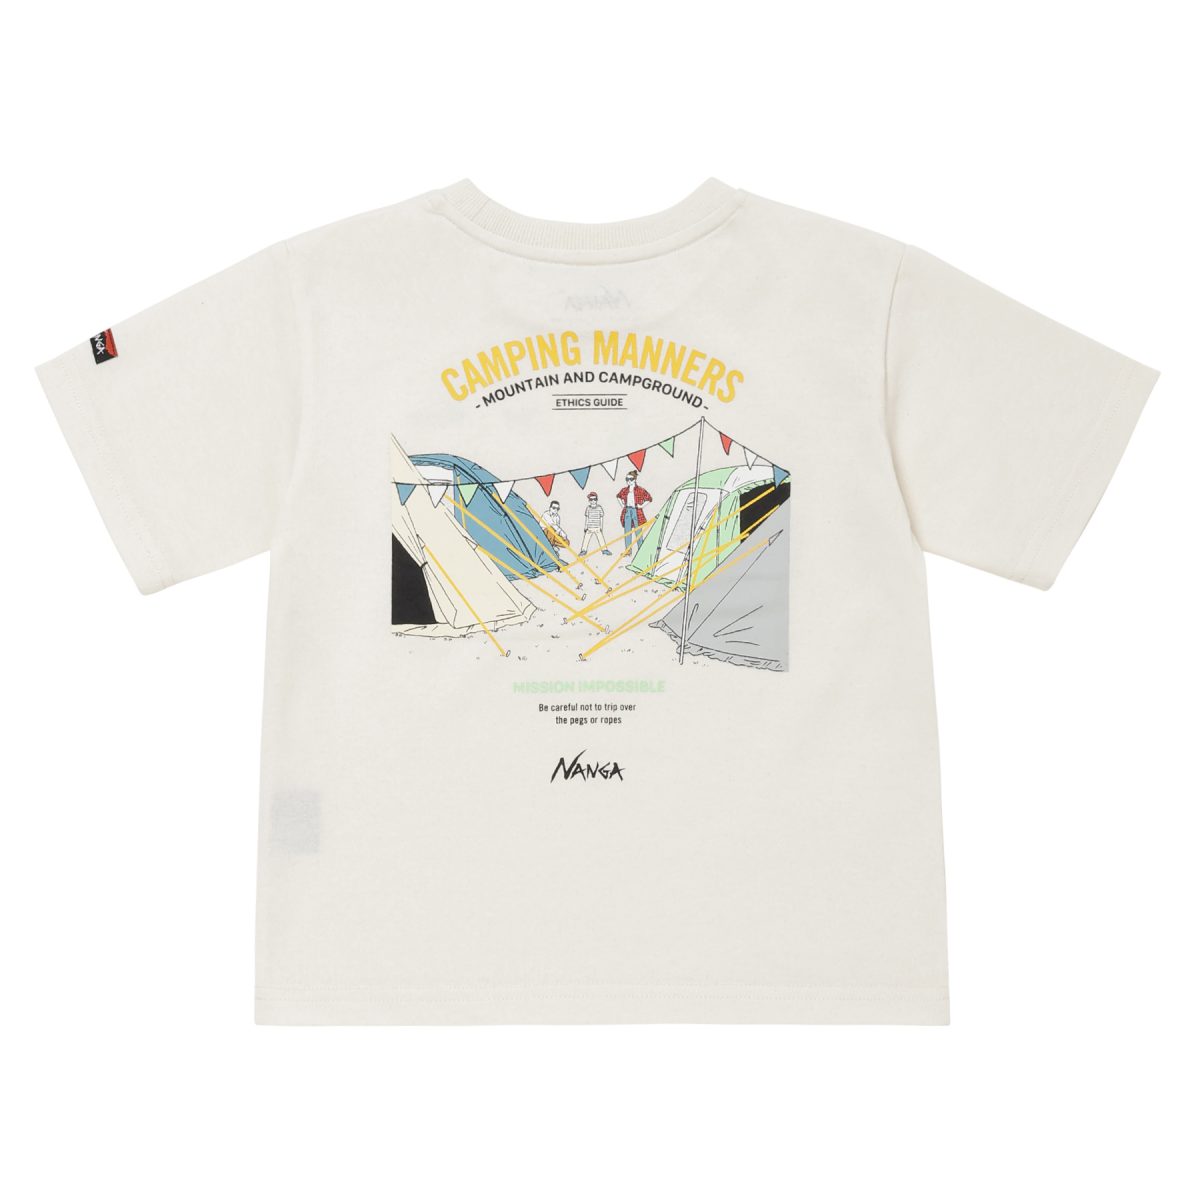 「ECO HYBRID CAMPING MANNERS PEG&ROPE KIDS TEE」￥4,400／ホワイト